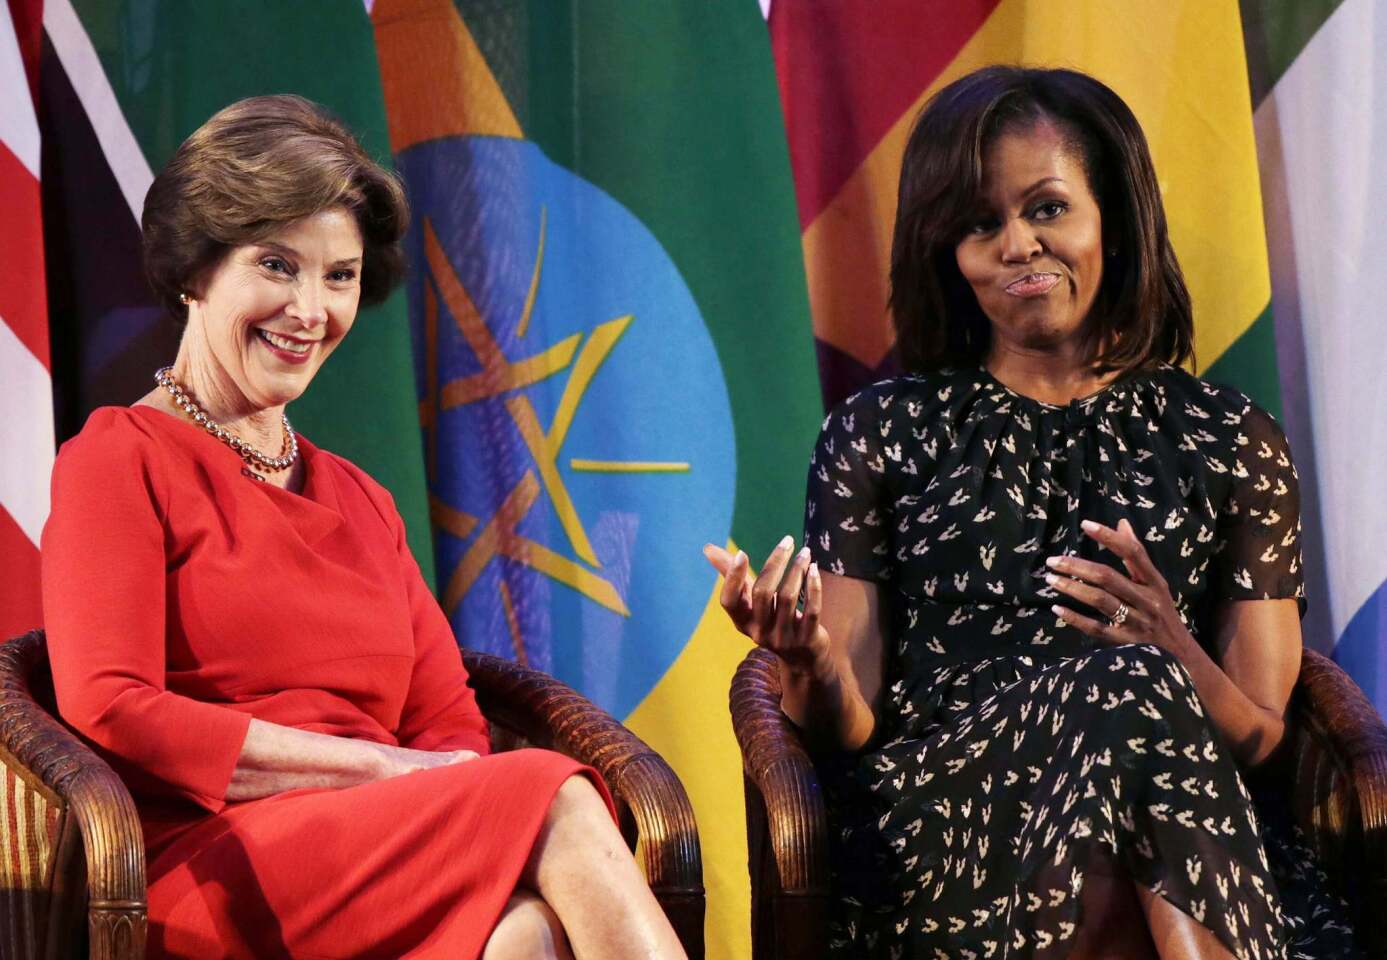 Former U.S. First Lady Laura Bush smiles next to current U.S. First Lady Michelle Obama at the African First Ladies Summit in Dar Es Salaam